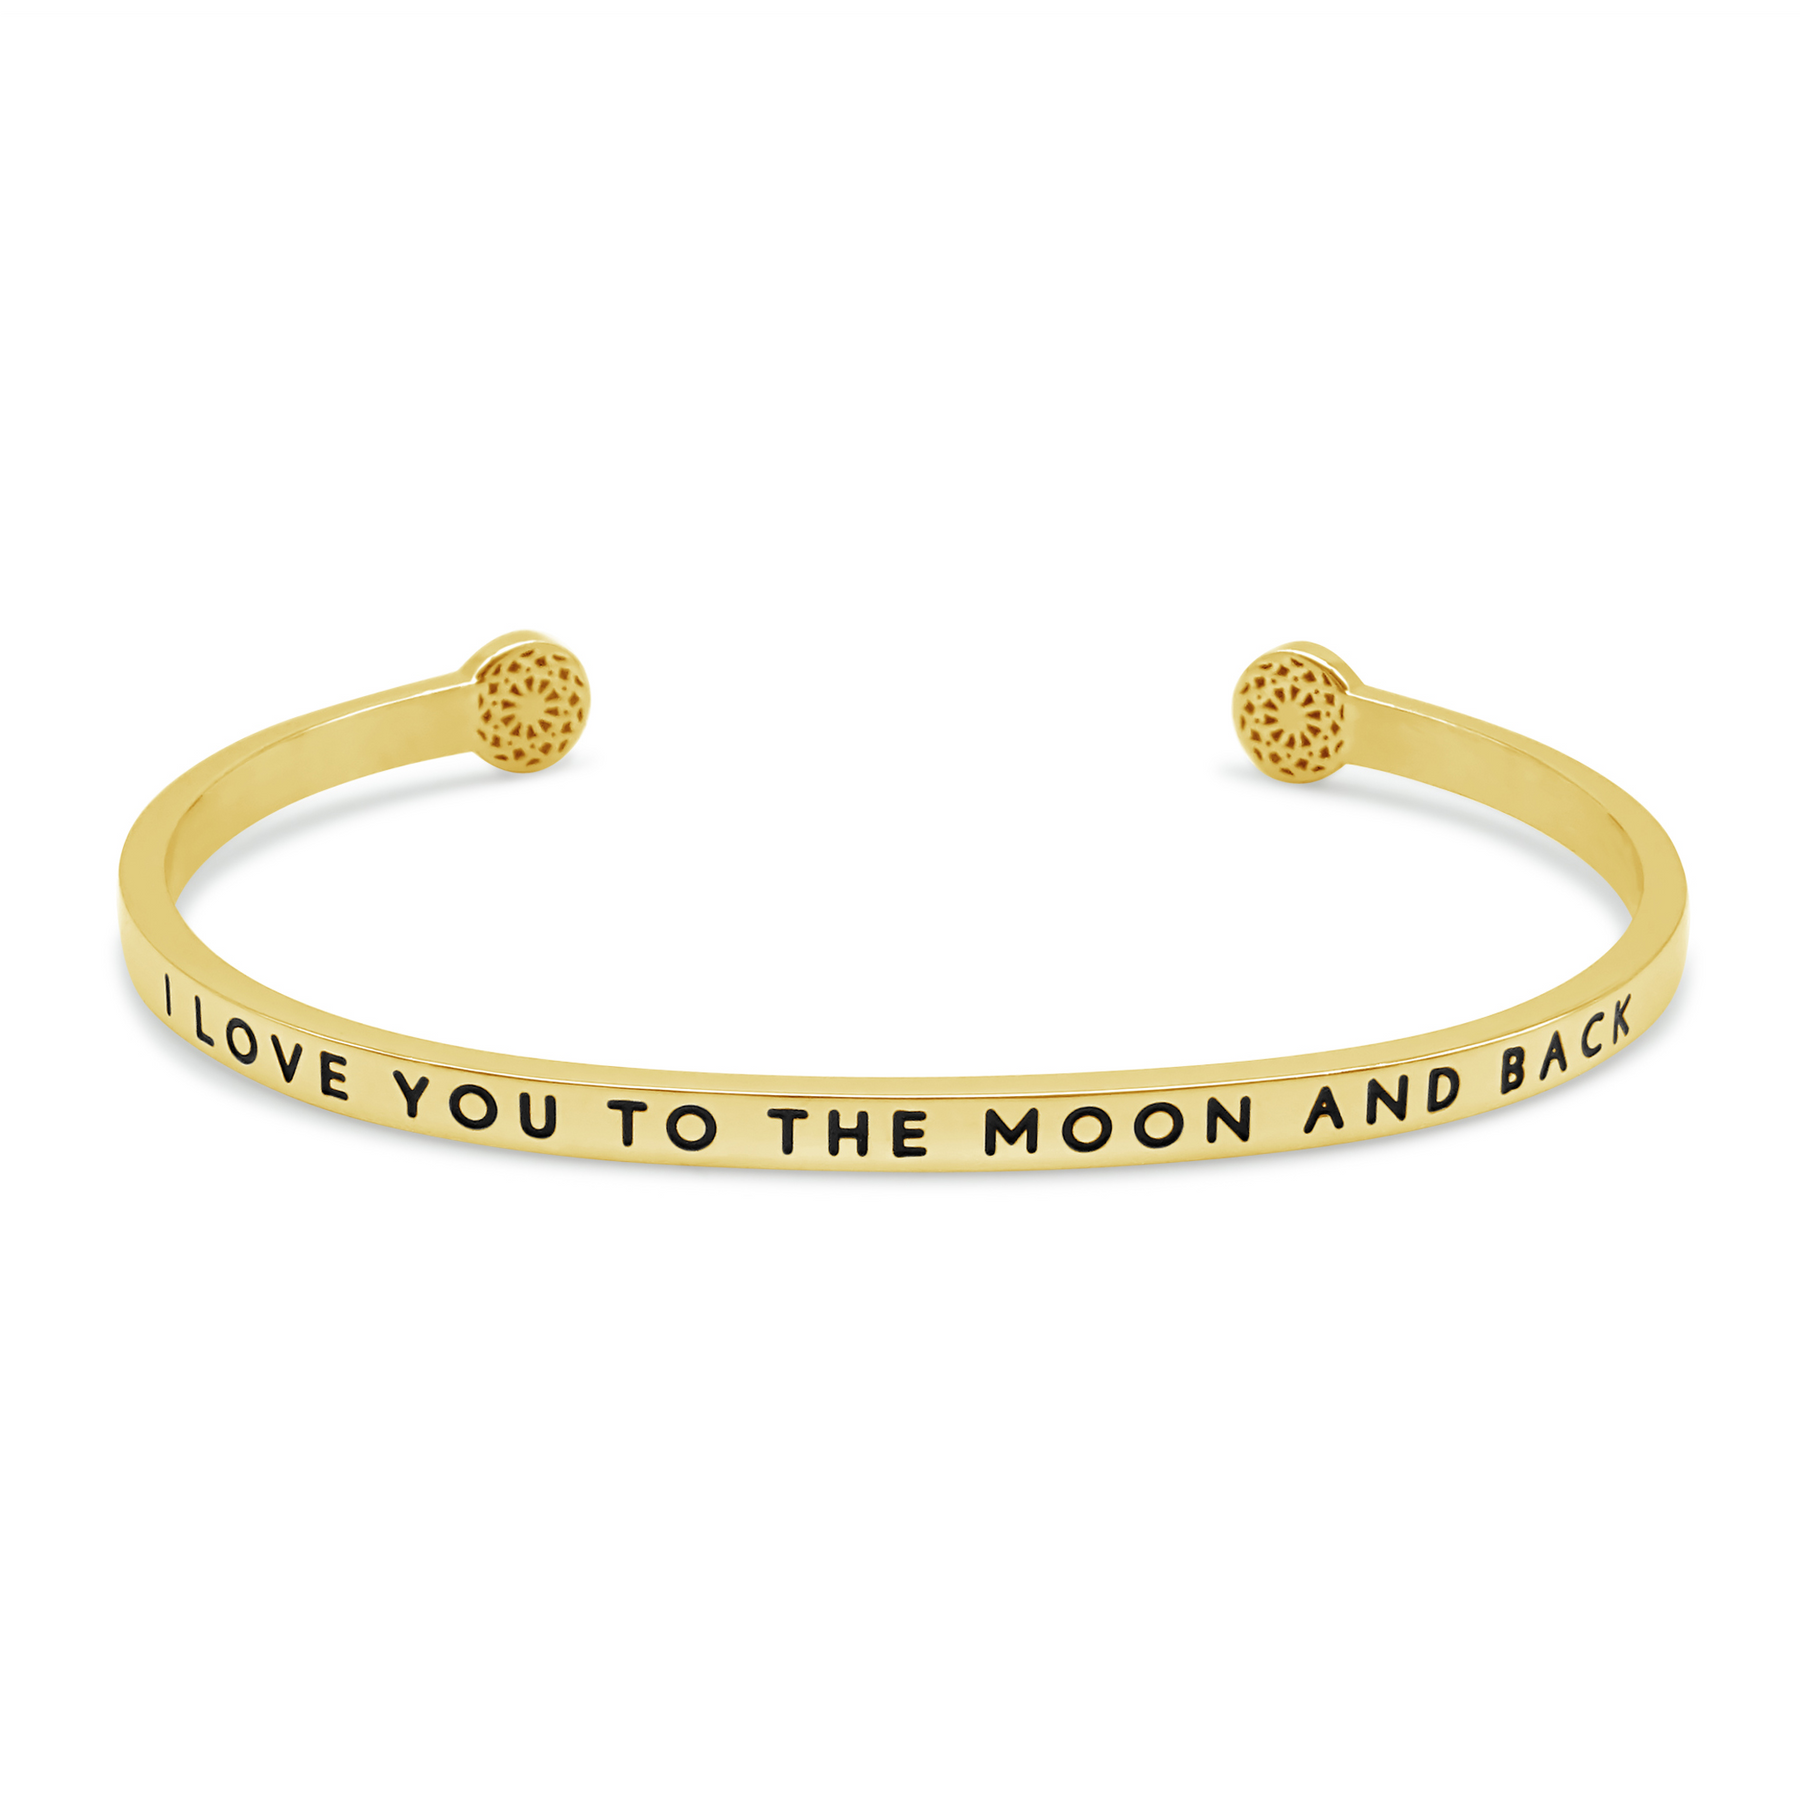 I love you to the moon and back - Armreif mit Gravur - simple pledge -  Allernixe